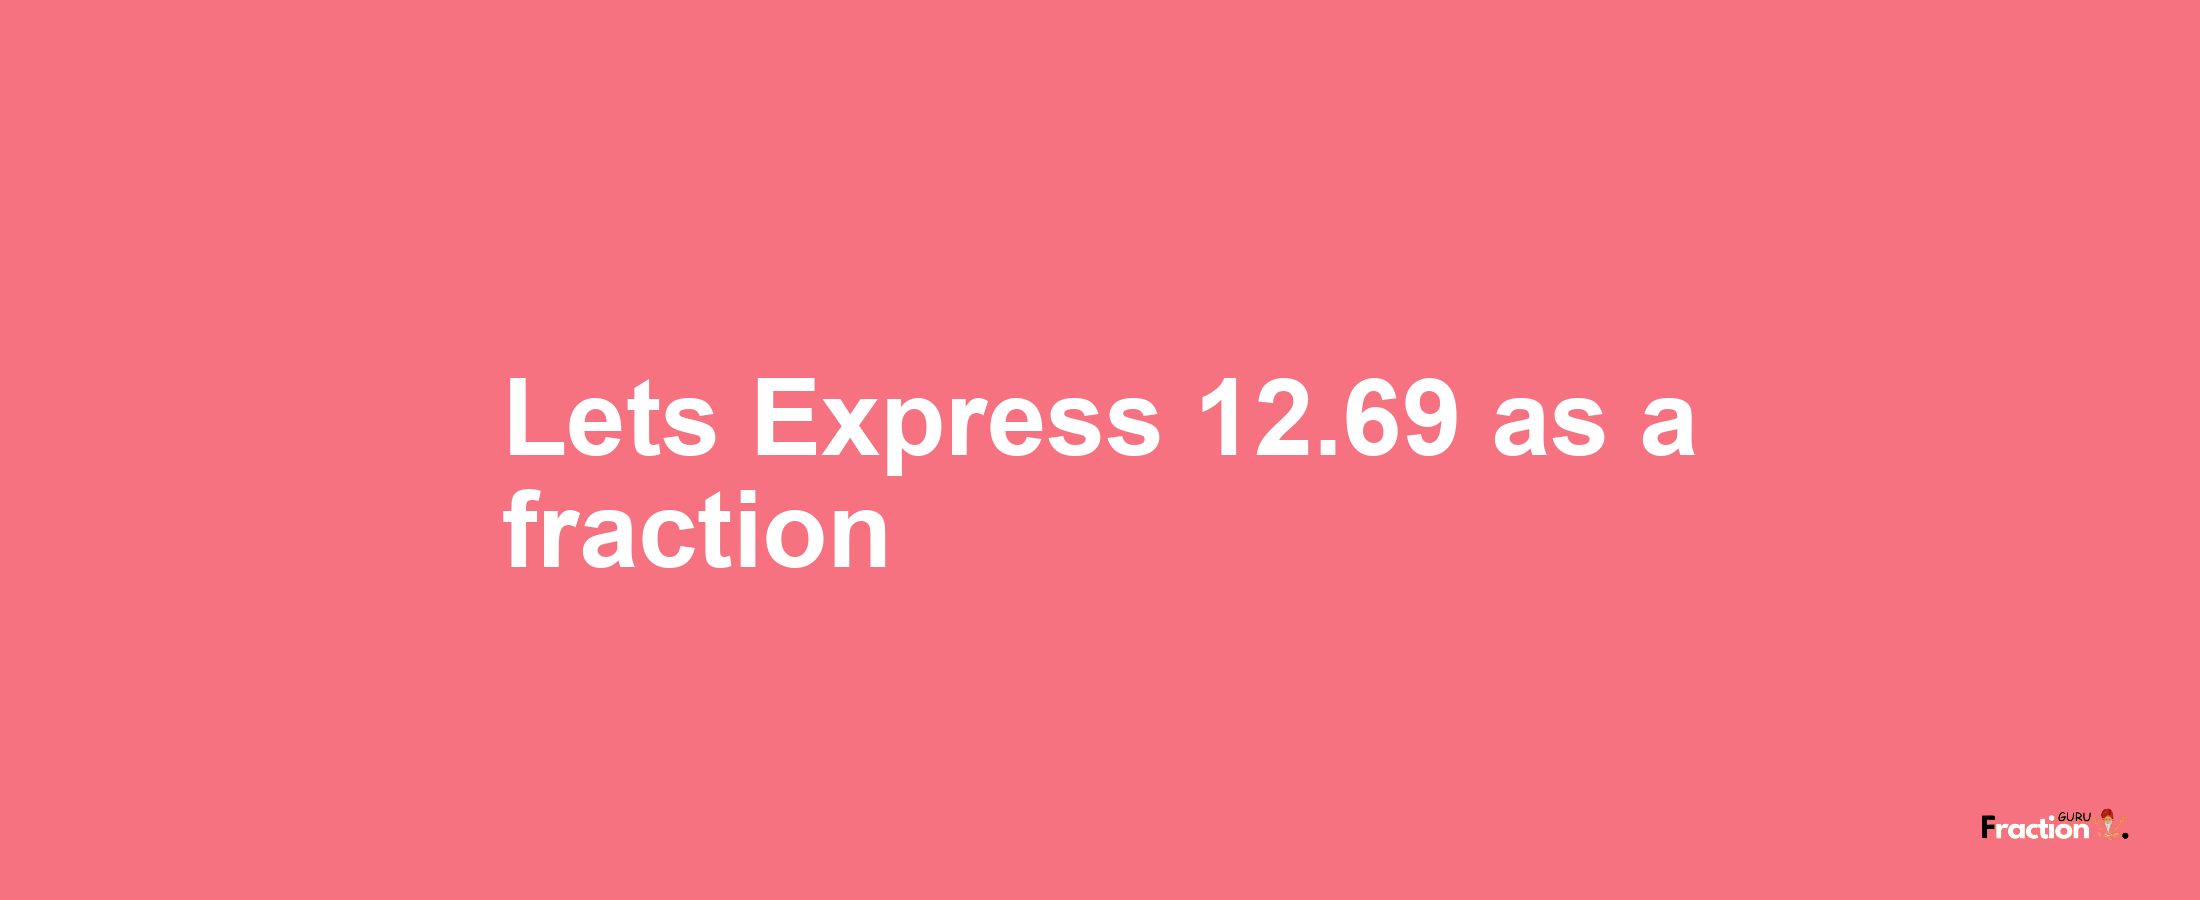 Lets Express 12.69 as afraction